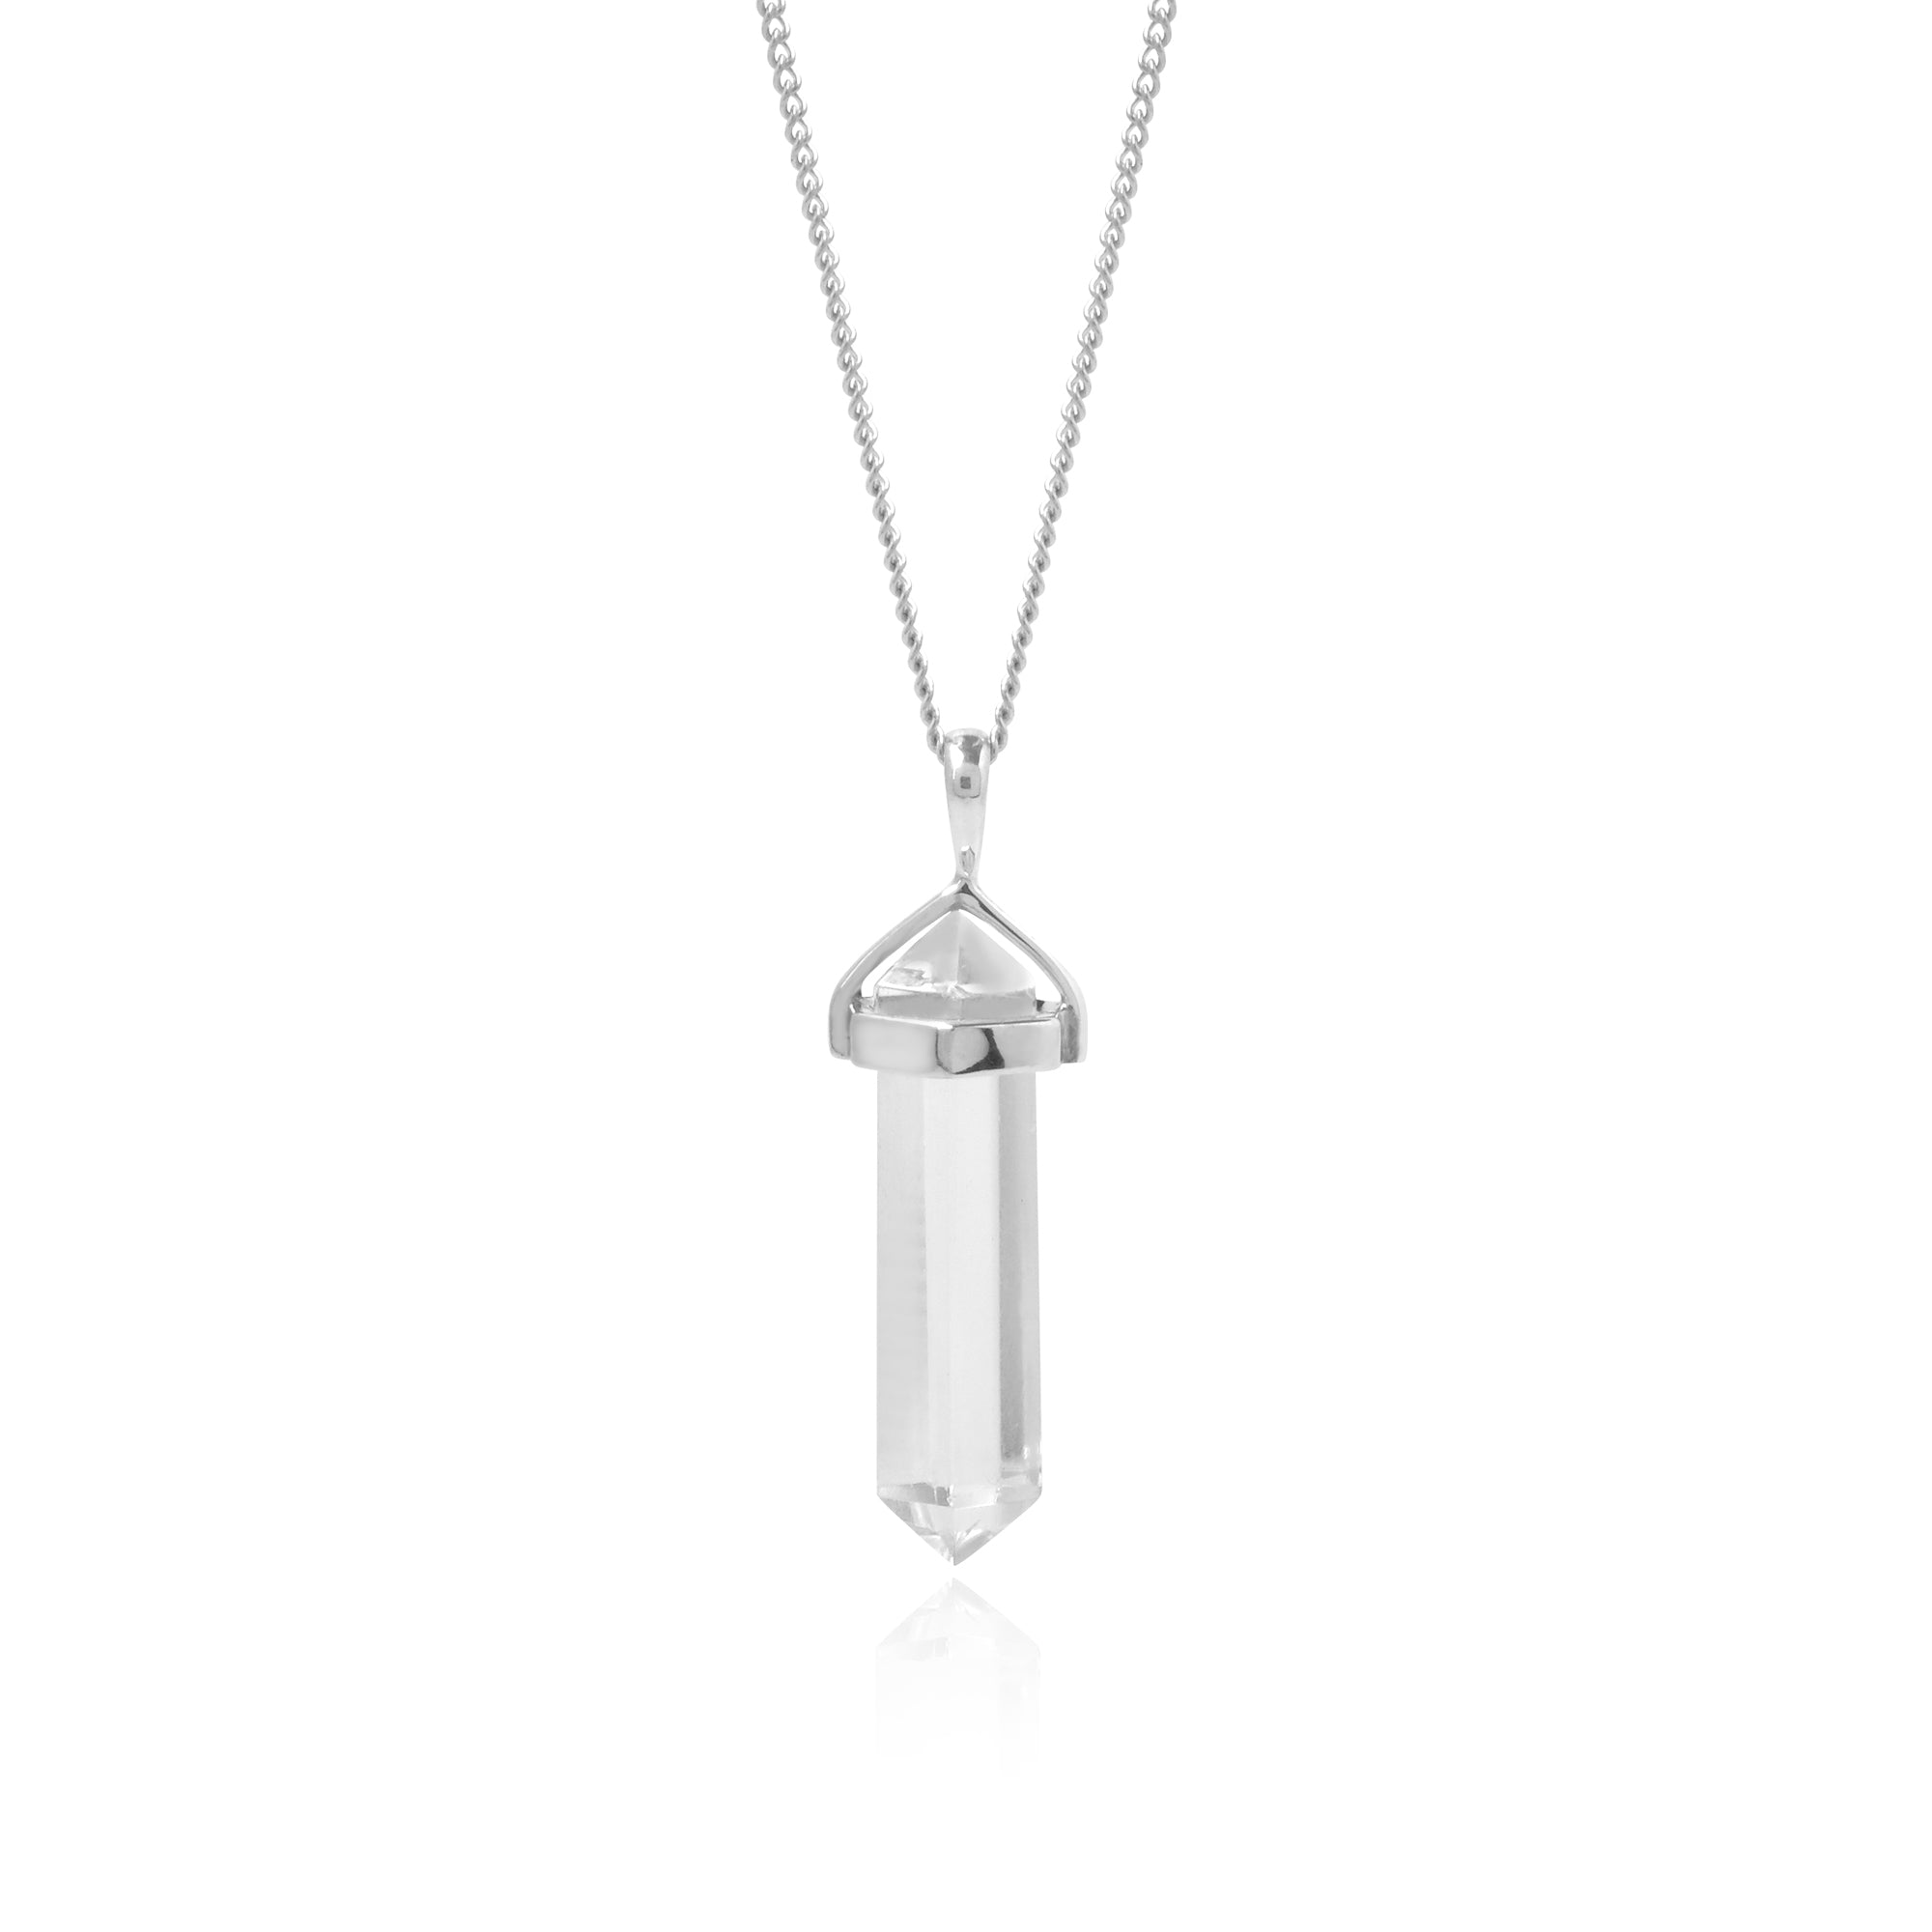 Pendulum Pendant in sterling silver 925/P.709RMS